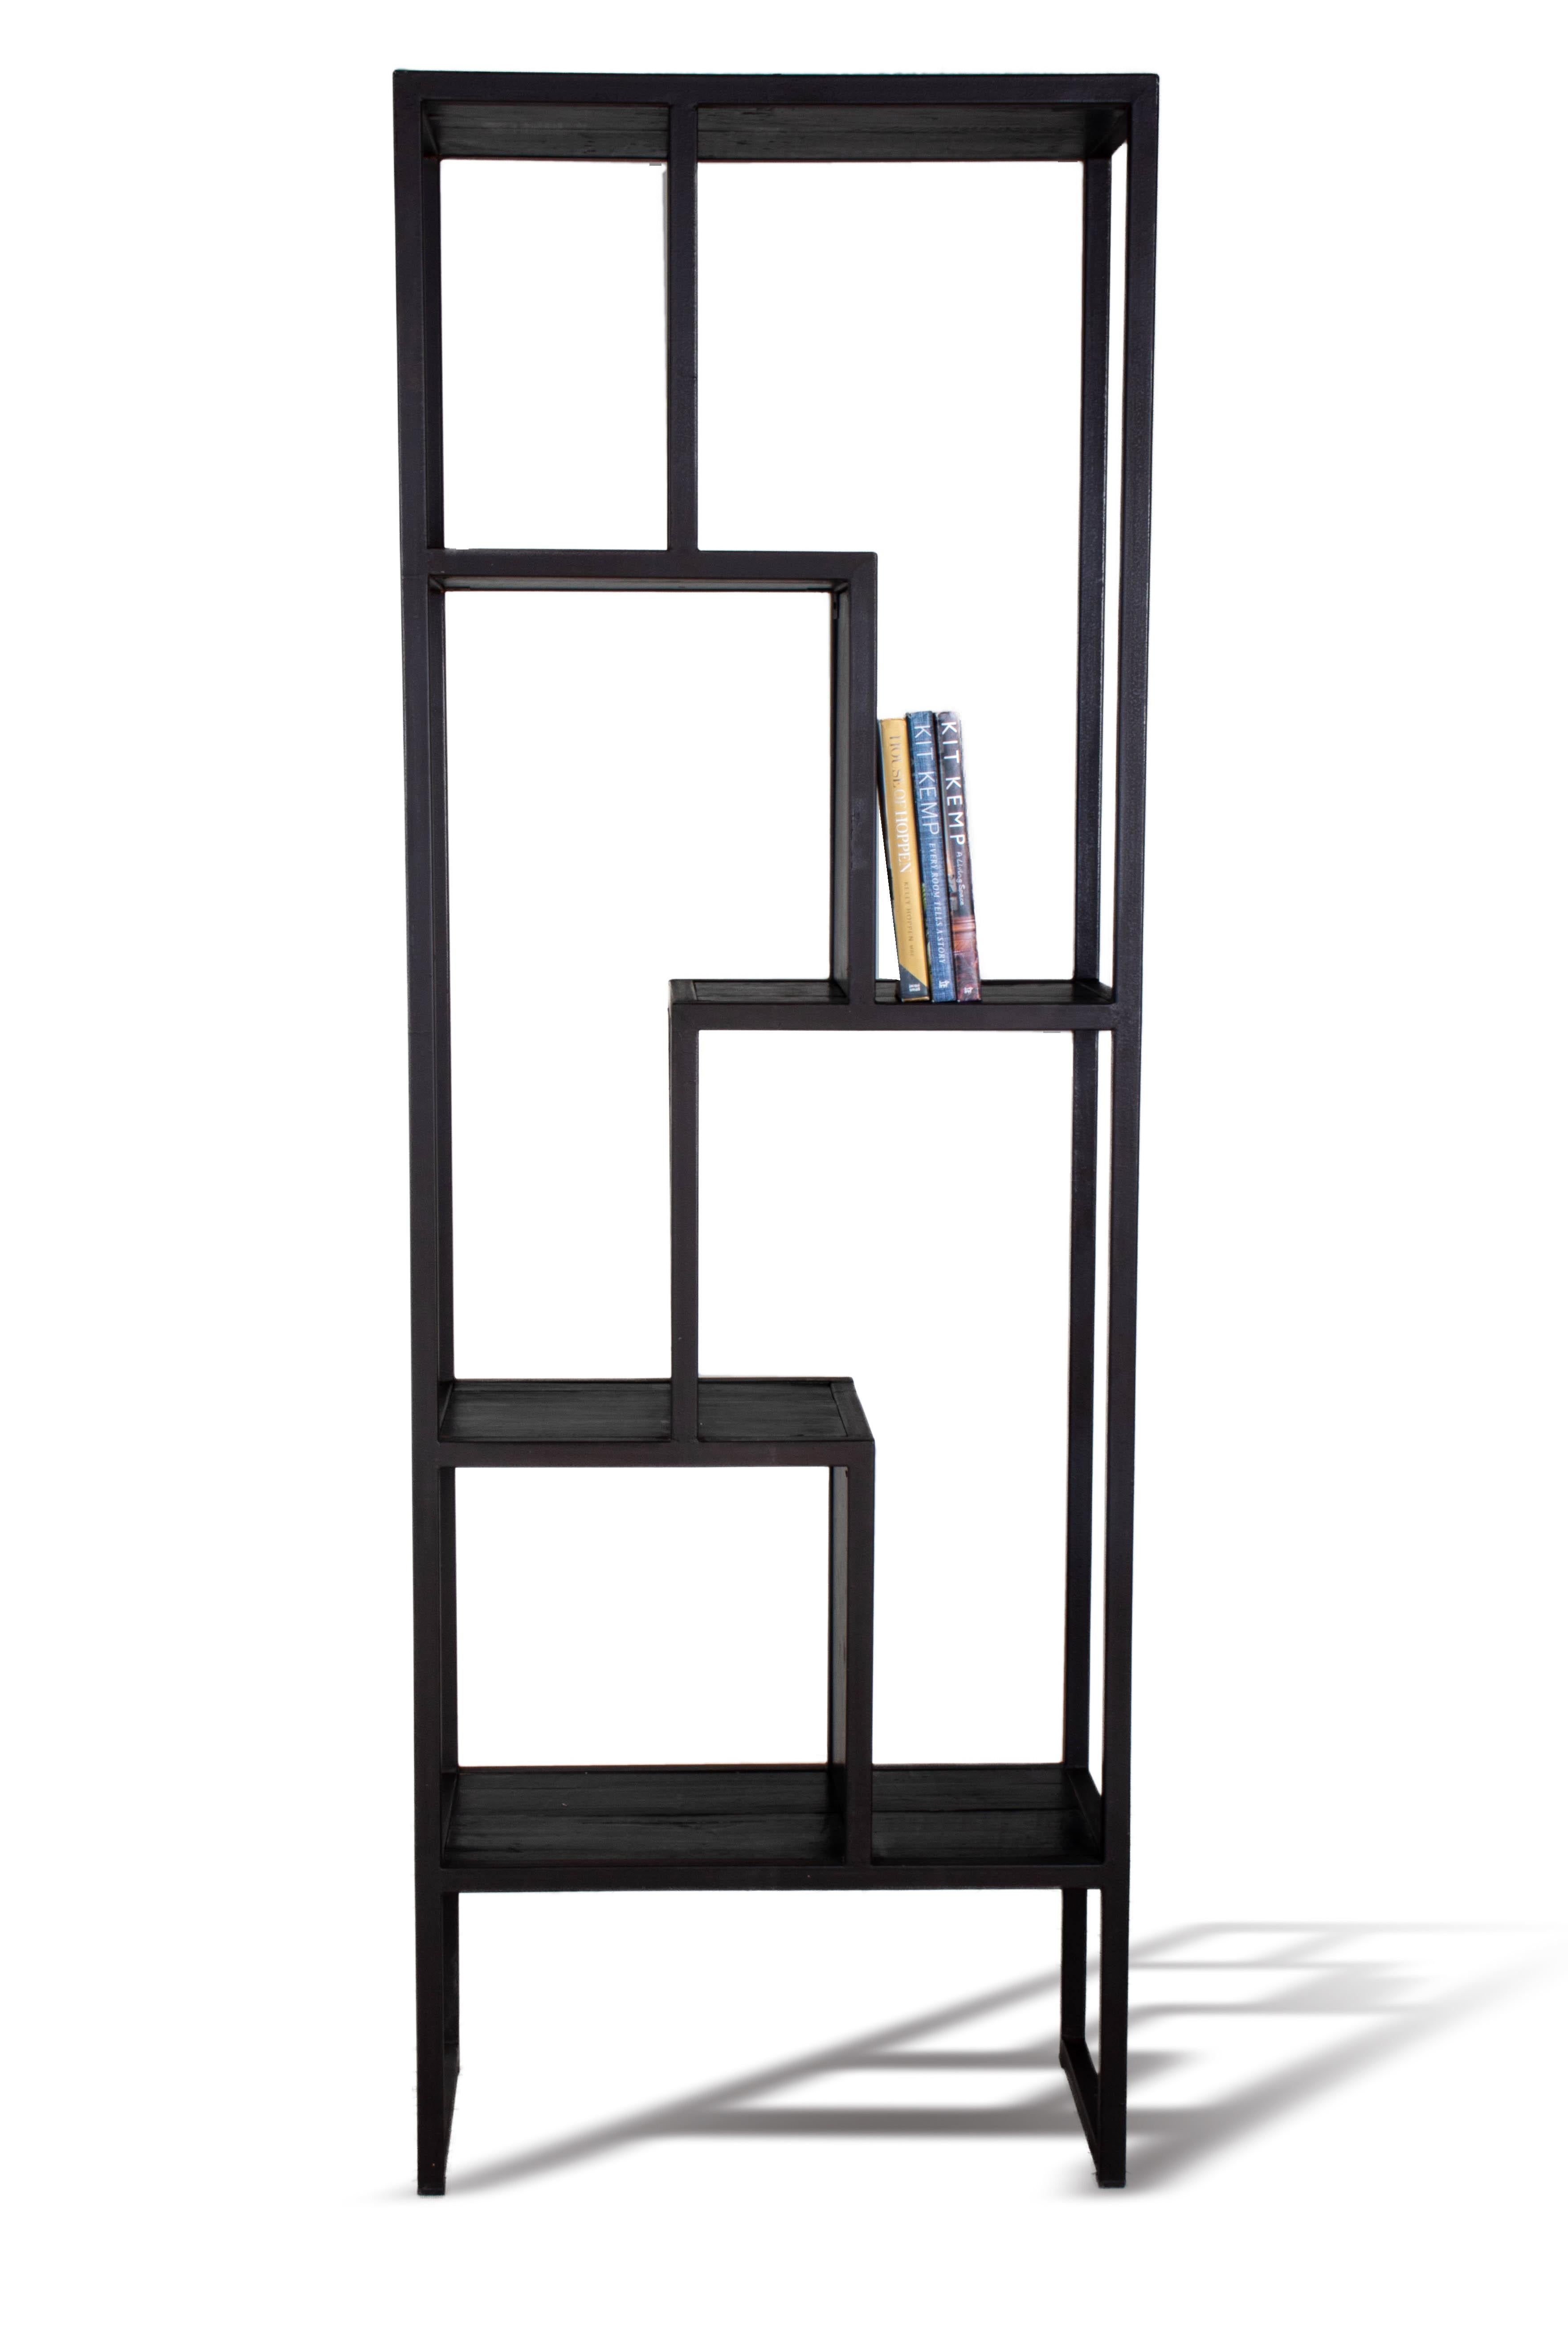 The wood and steel offset bookshelf is a shelving system that's perfect for any room in your home. It has a clean, mid-century look with a modern and contemporary edge. The shelves are made from quality wood with black steel legs and framework.